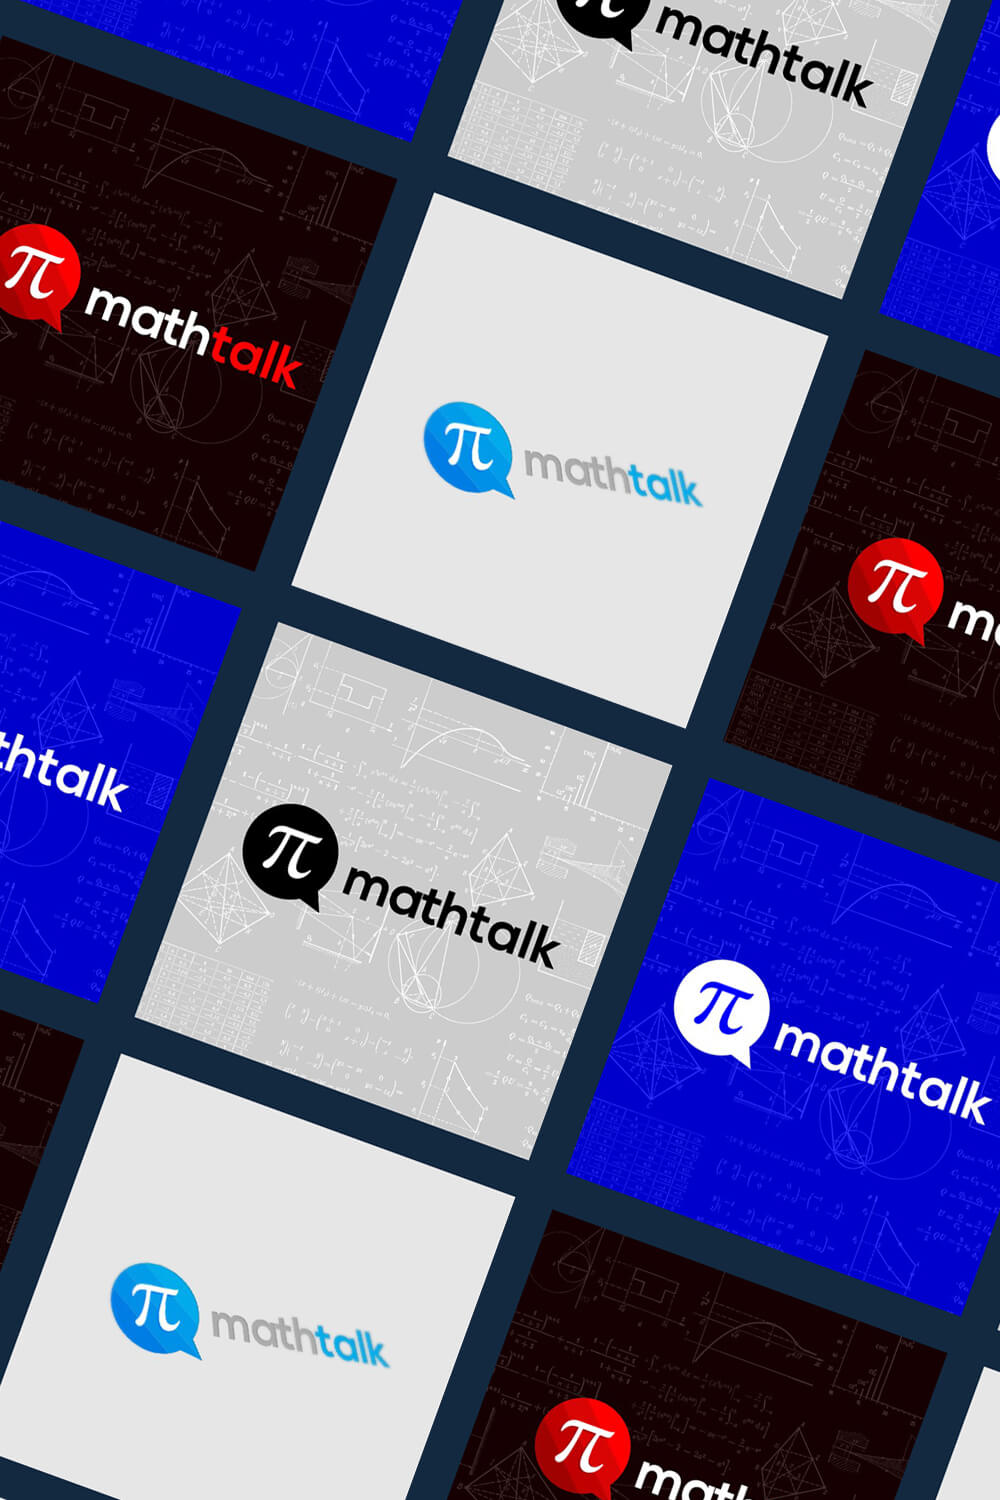 Many logos of different colors on squares with different backgrounds in rows at an angle.